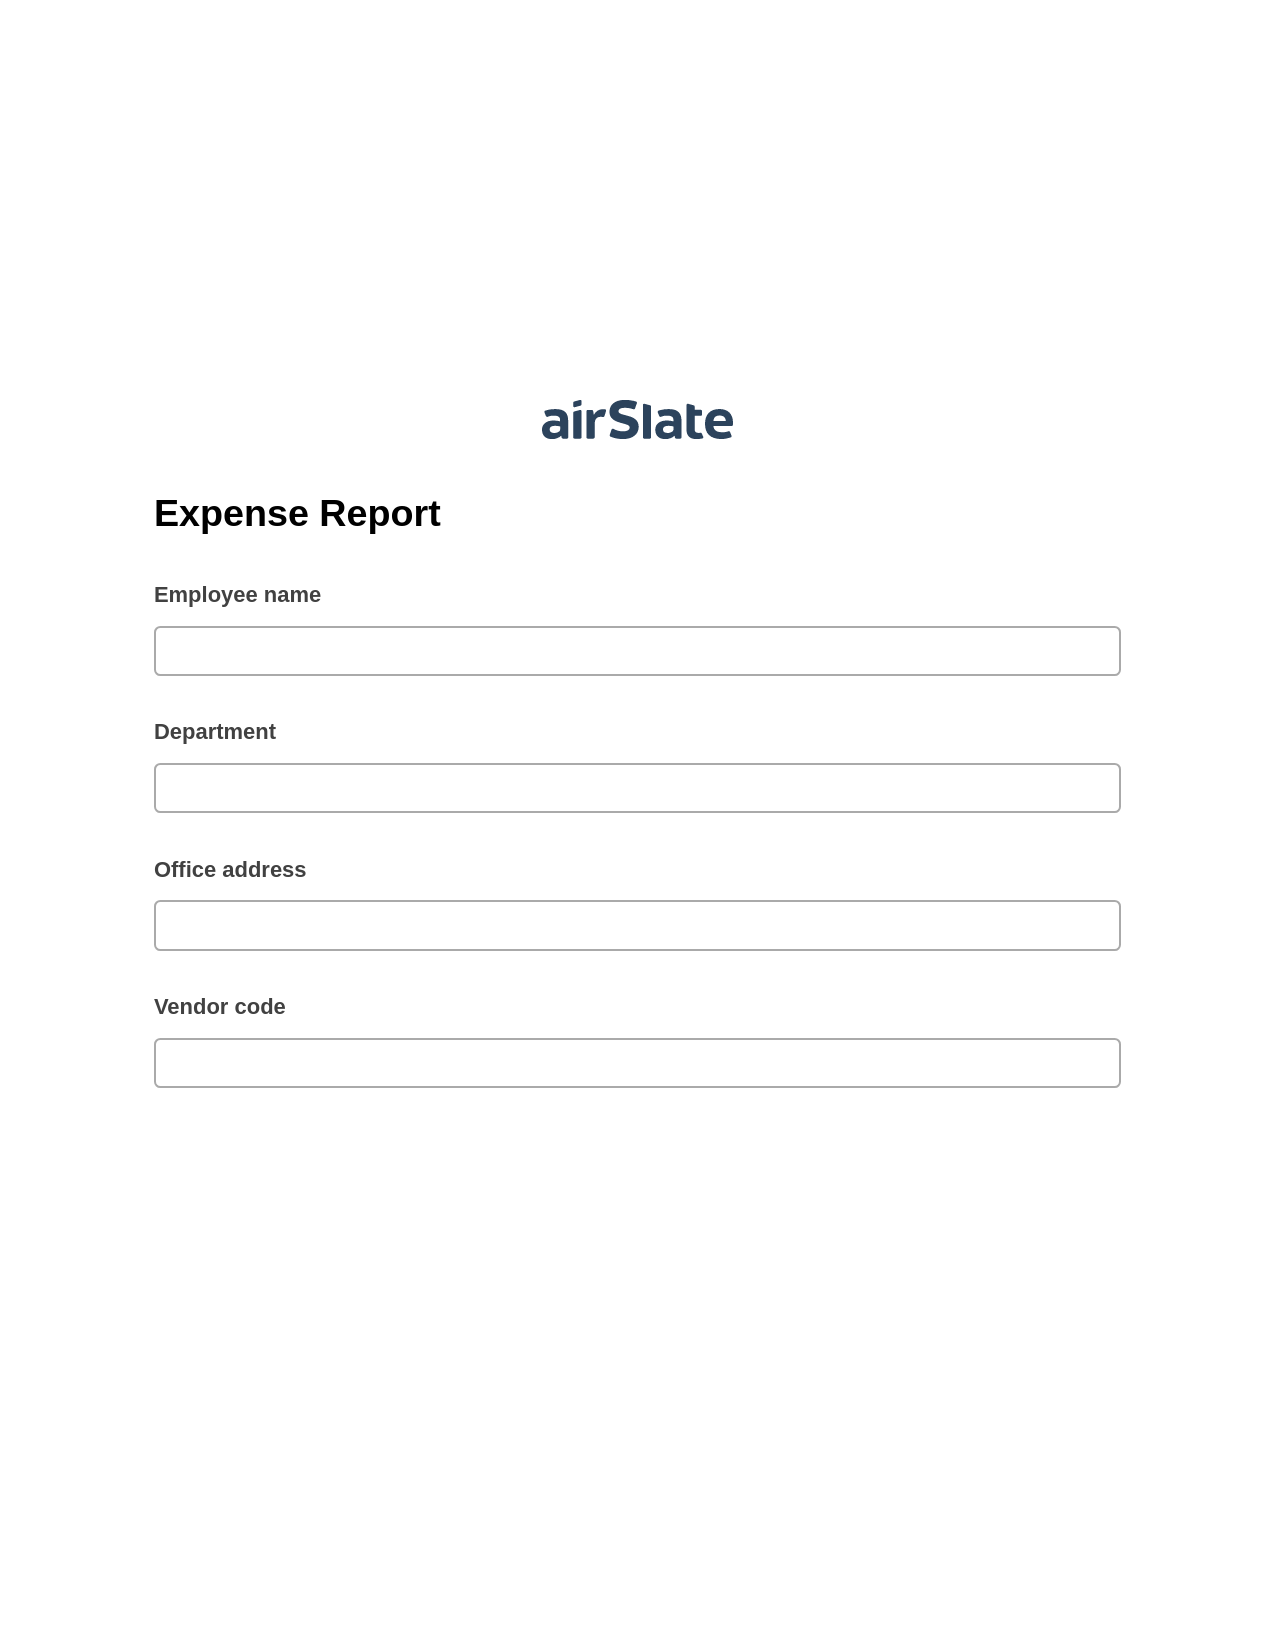 Expense Report Pre-fill from Salesforce Record Bot, Update Salesforce Record Bot, Export to Smartsheet